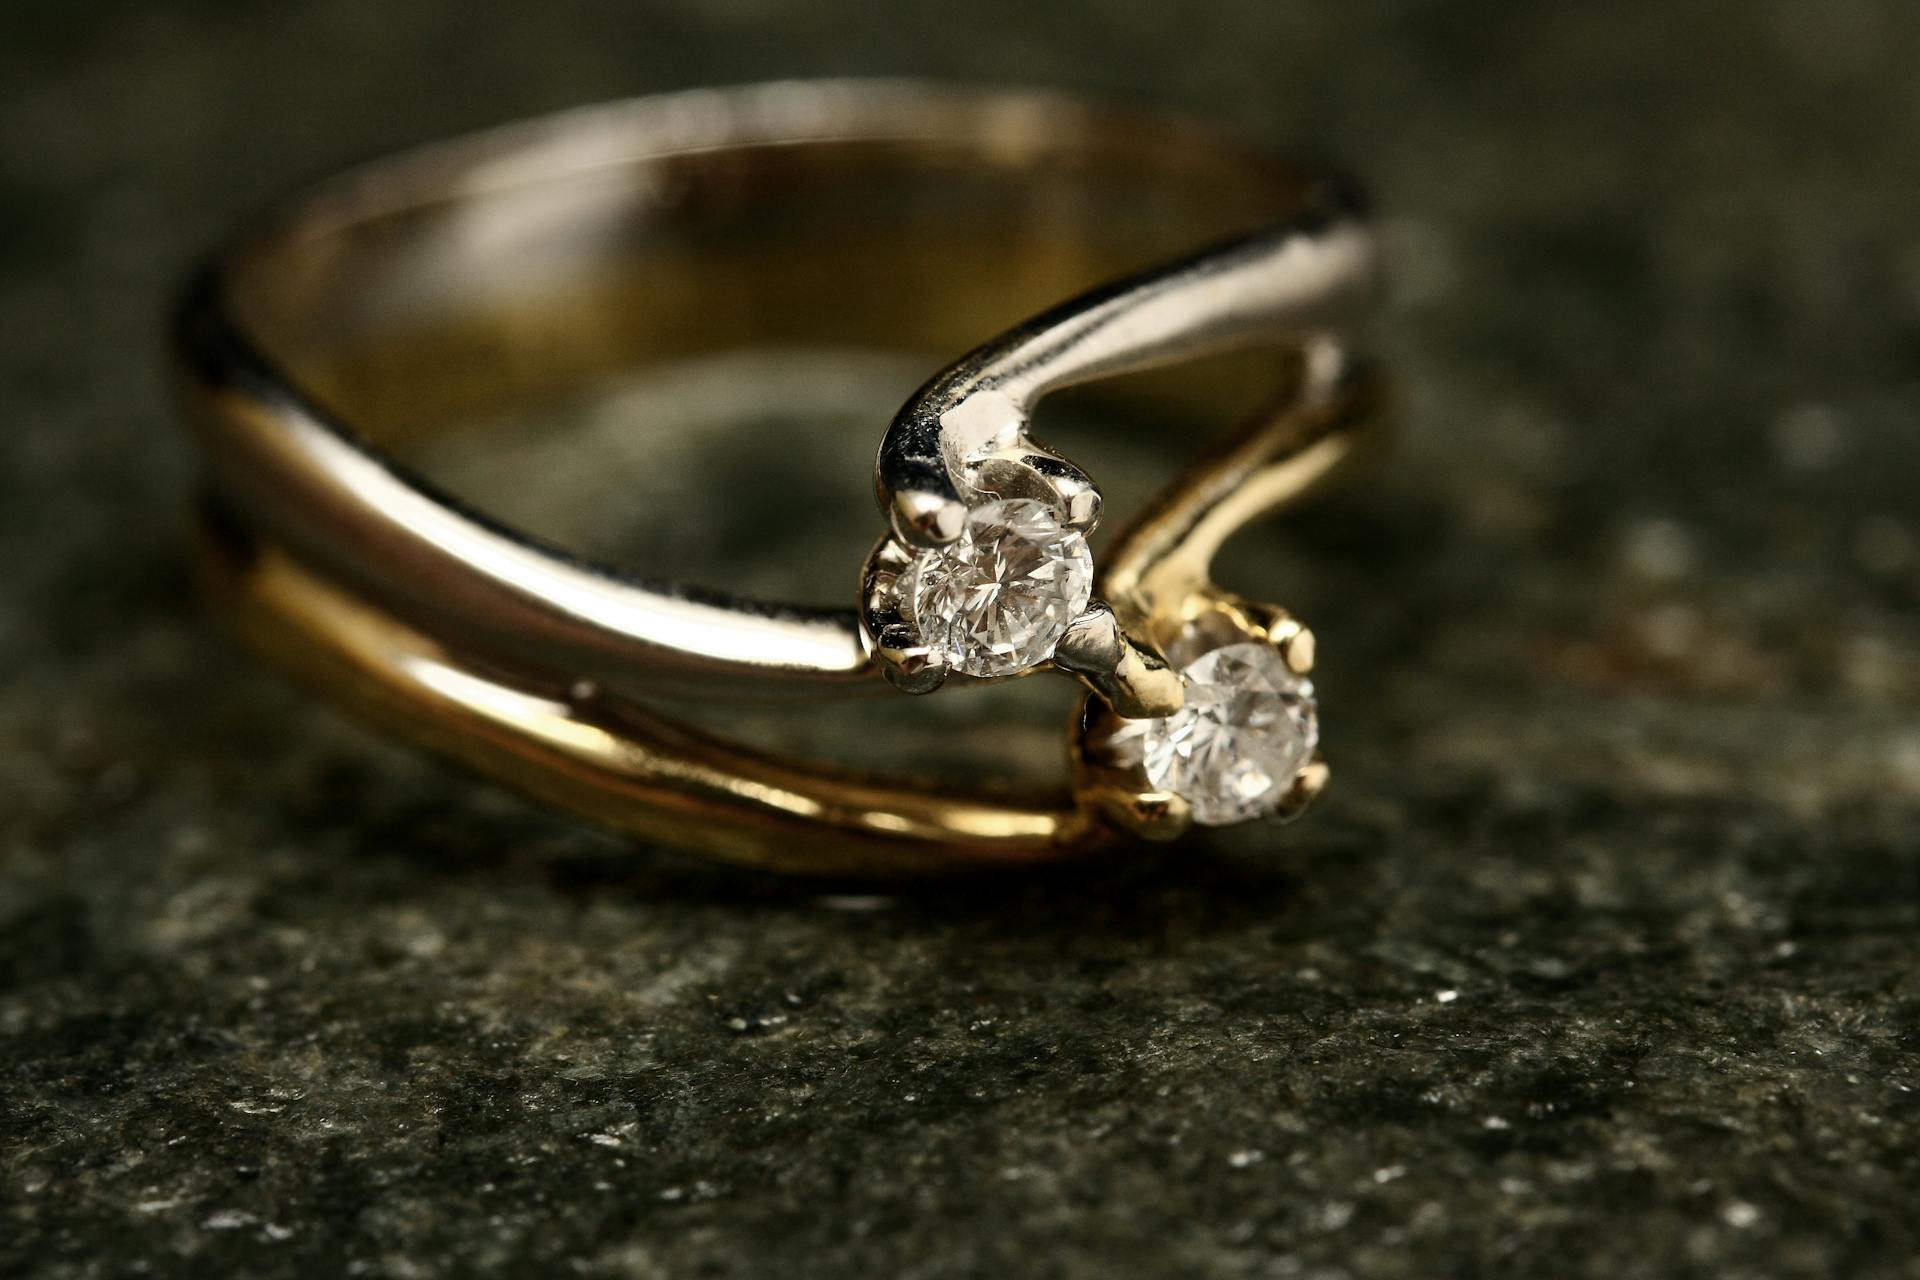 A close-up photo of a ring with diamonds | Source: Pexels